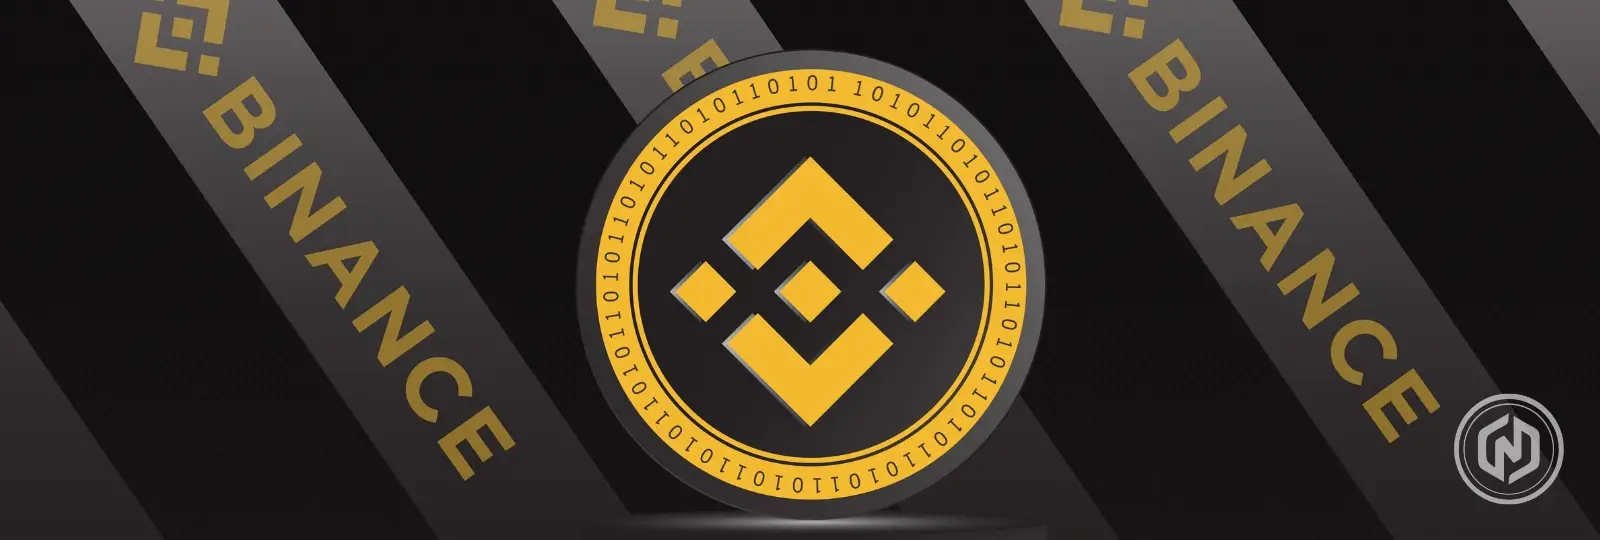 Binance.US expects more discovery as the SEC lawsuit progresses